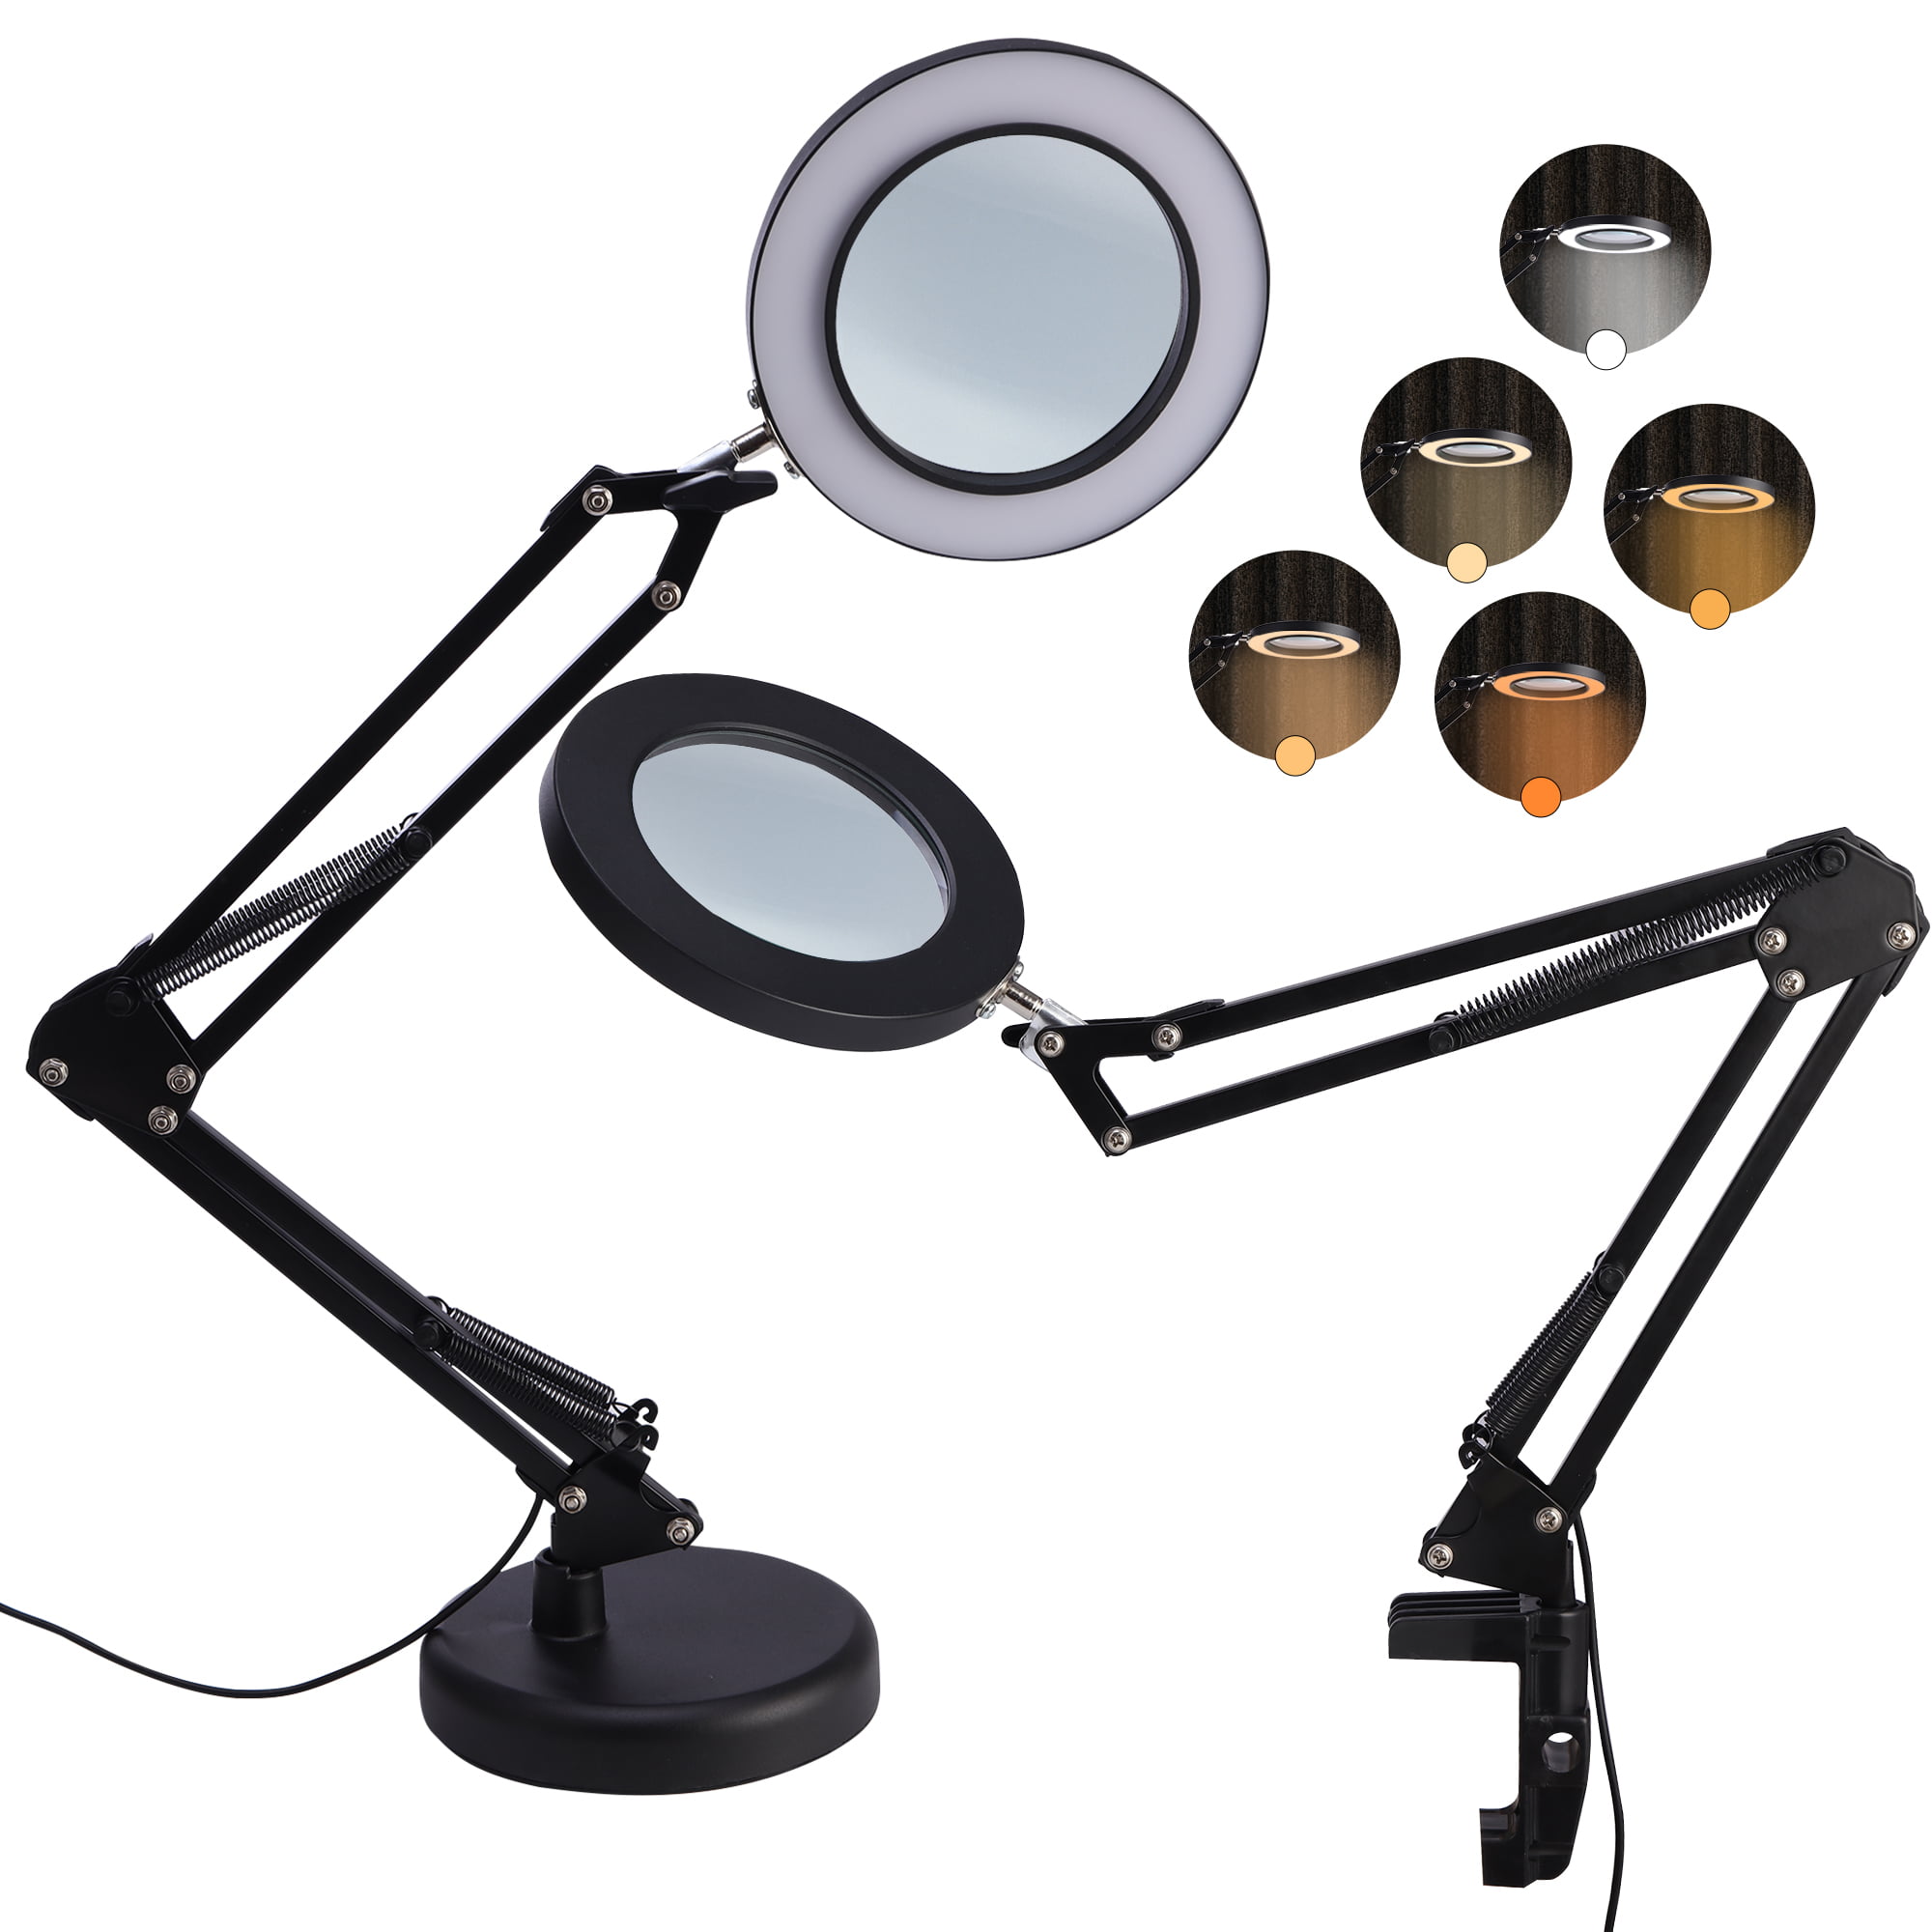 LELINTA Magnifying Glass LED Lamp, Lighted Magnifier with Stand & Clamp for  Desk, Sewing, Bright Light for Reading, Crafts, Jewelry Magnifying Glass,  2.25x 5x Magnification, Adjustable Gooseneck 